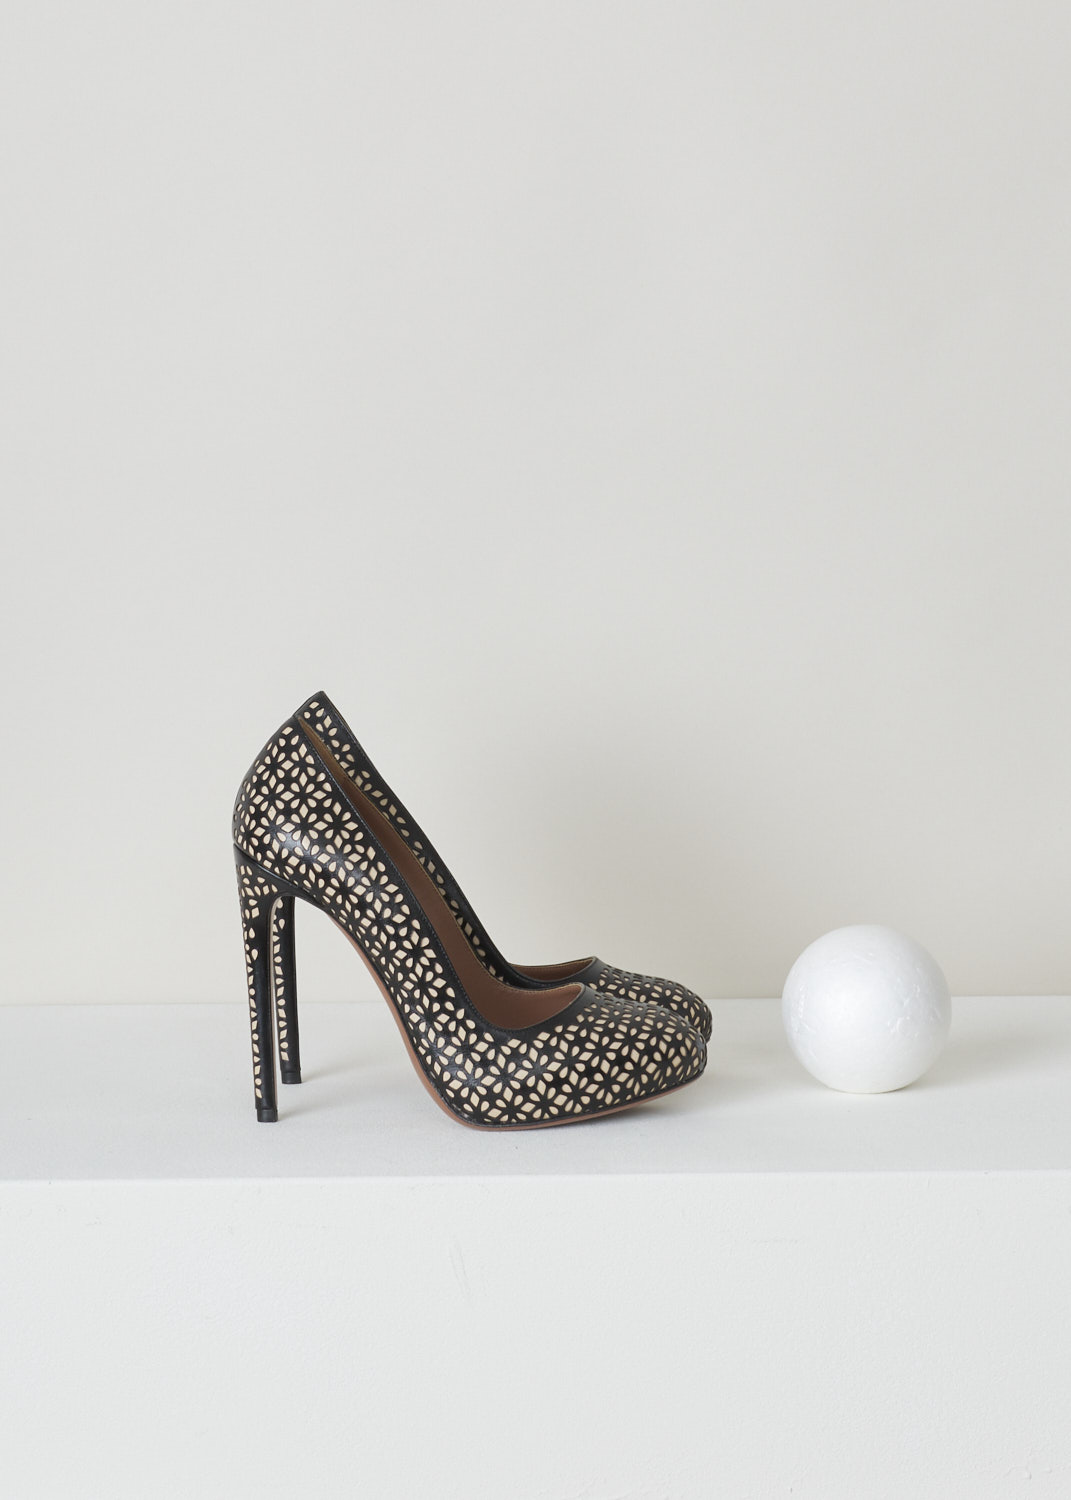 AlaÃ¯a, Black high heeled laser-cut pump, 3S2I013CE01_noir_roche_C950, black, side, Lovely high heel pumps comes in a two-tone colour palette, being the beige background colour which is adorned with this black signature laser-cut Vienne motif on top. Furthermore, this model has a rond nose and black trimmed topline. 

Heel height: 11 cm / 4.3 inch. 
